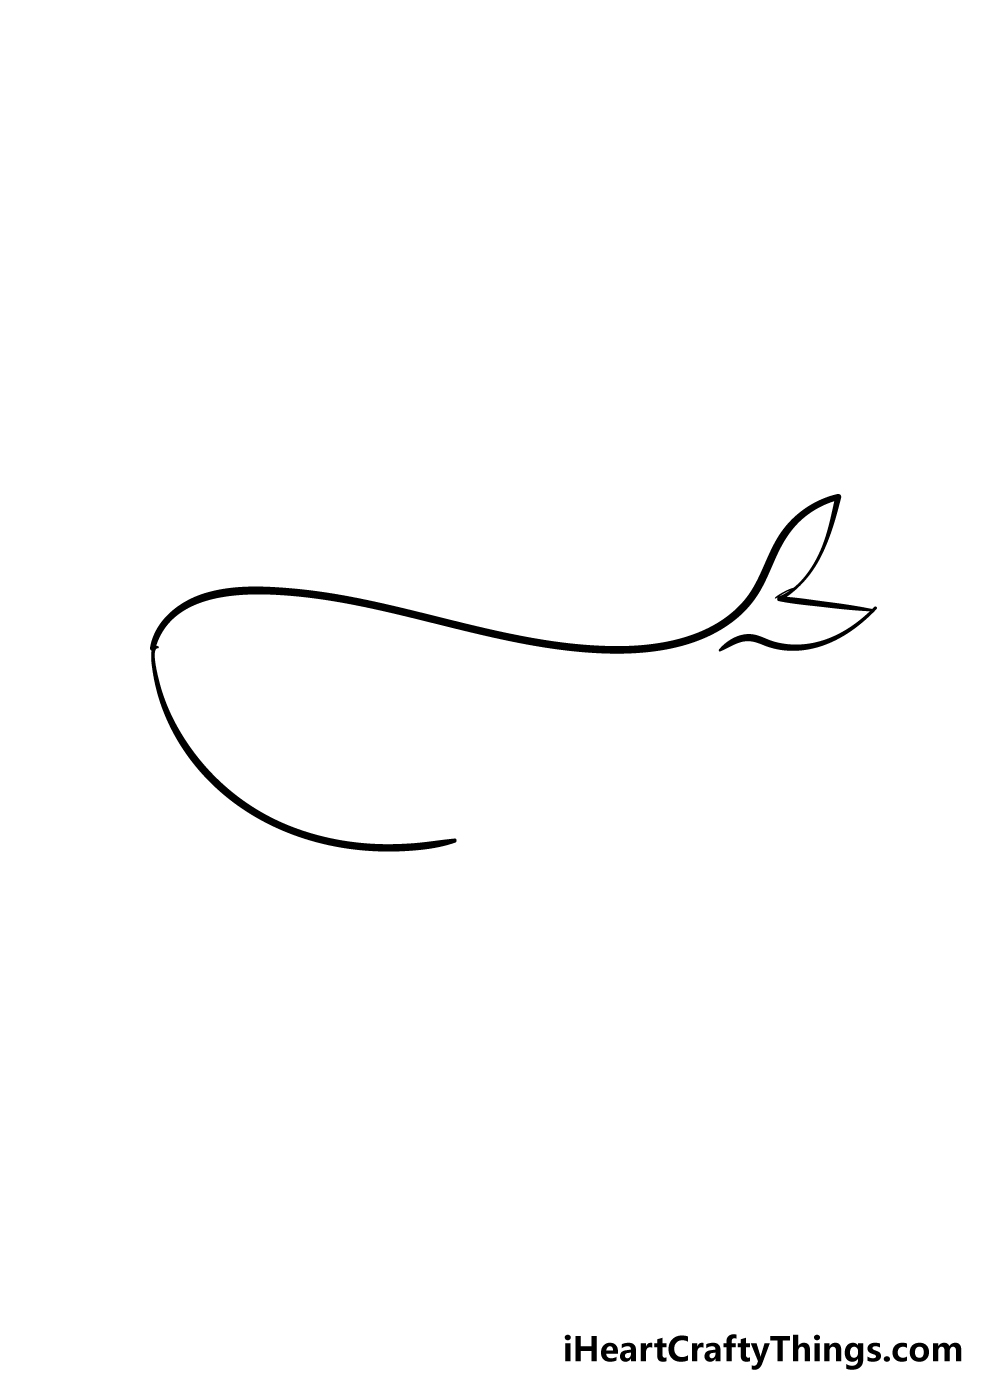 whale drawing step 2